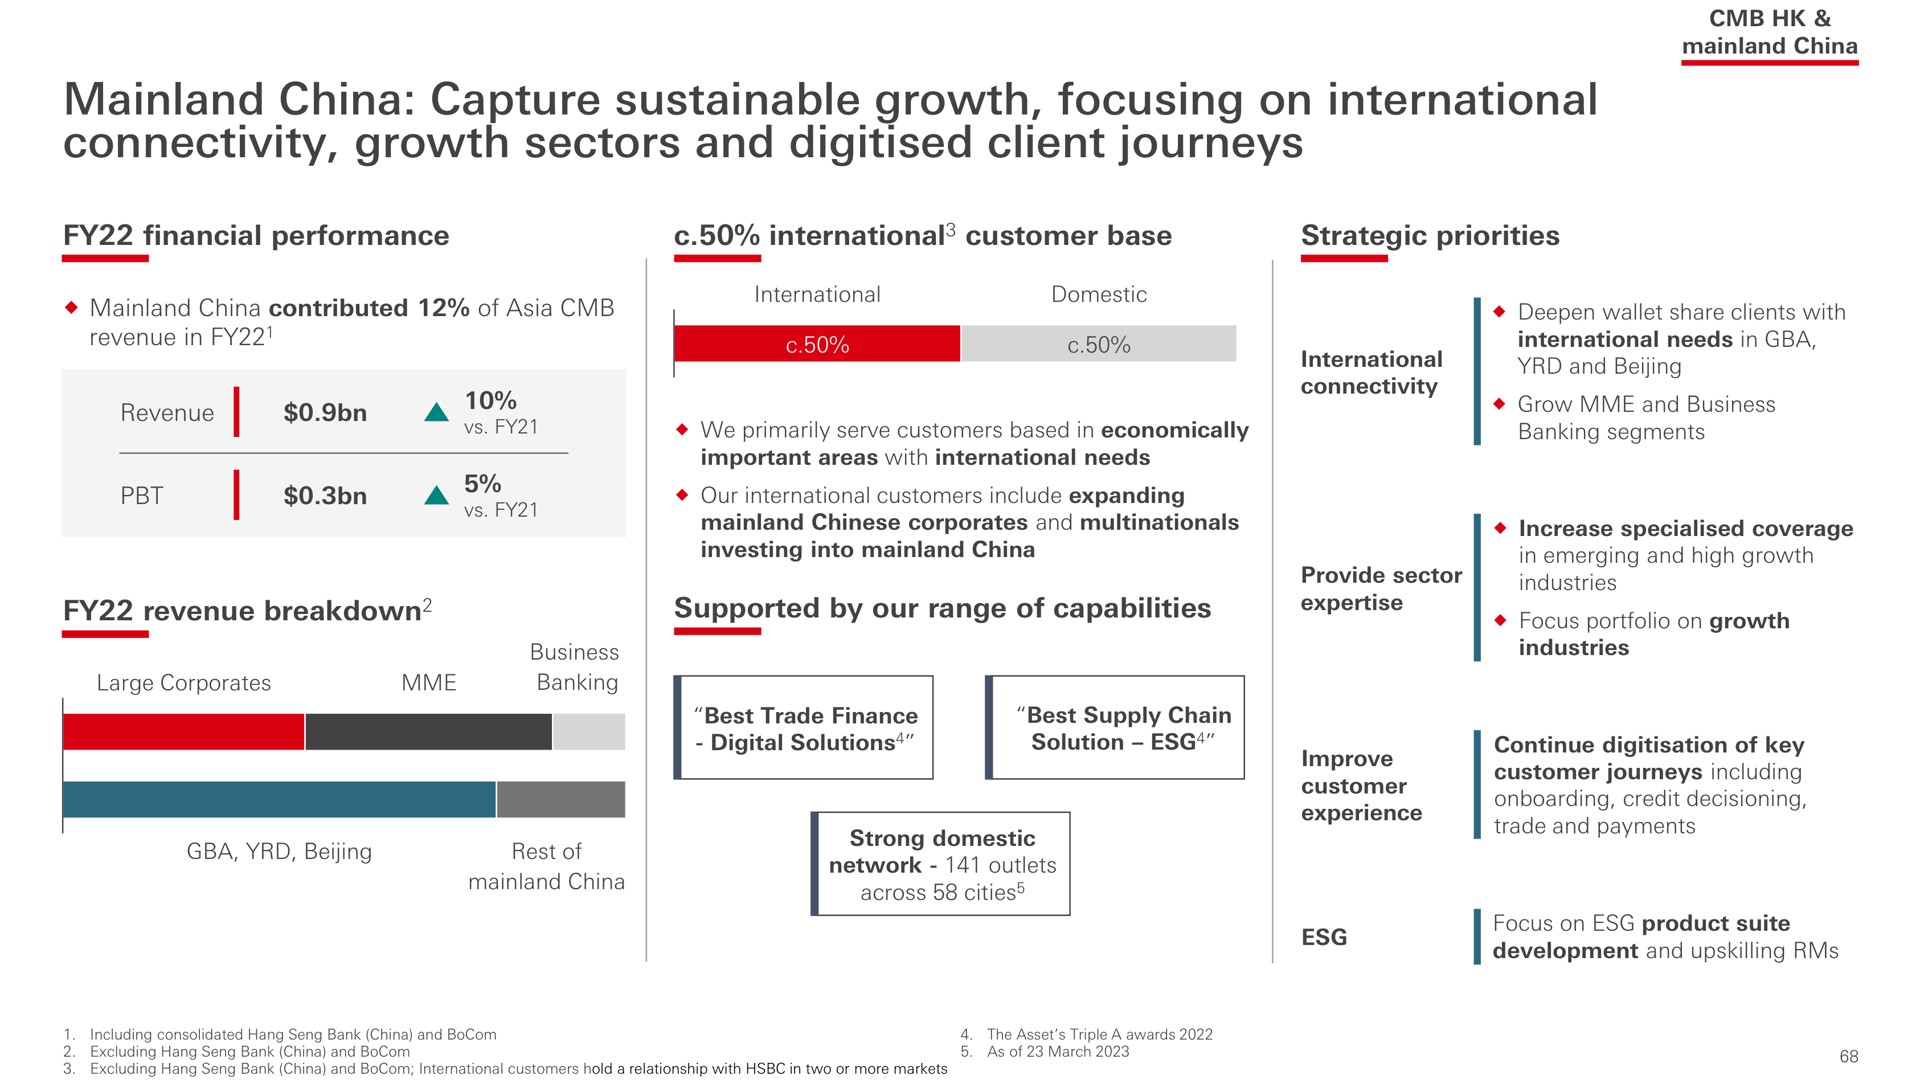 china capture sustainable growth focusing on international connectivity growth sectors and client journeys | HSBC